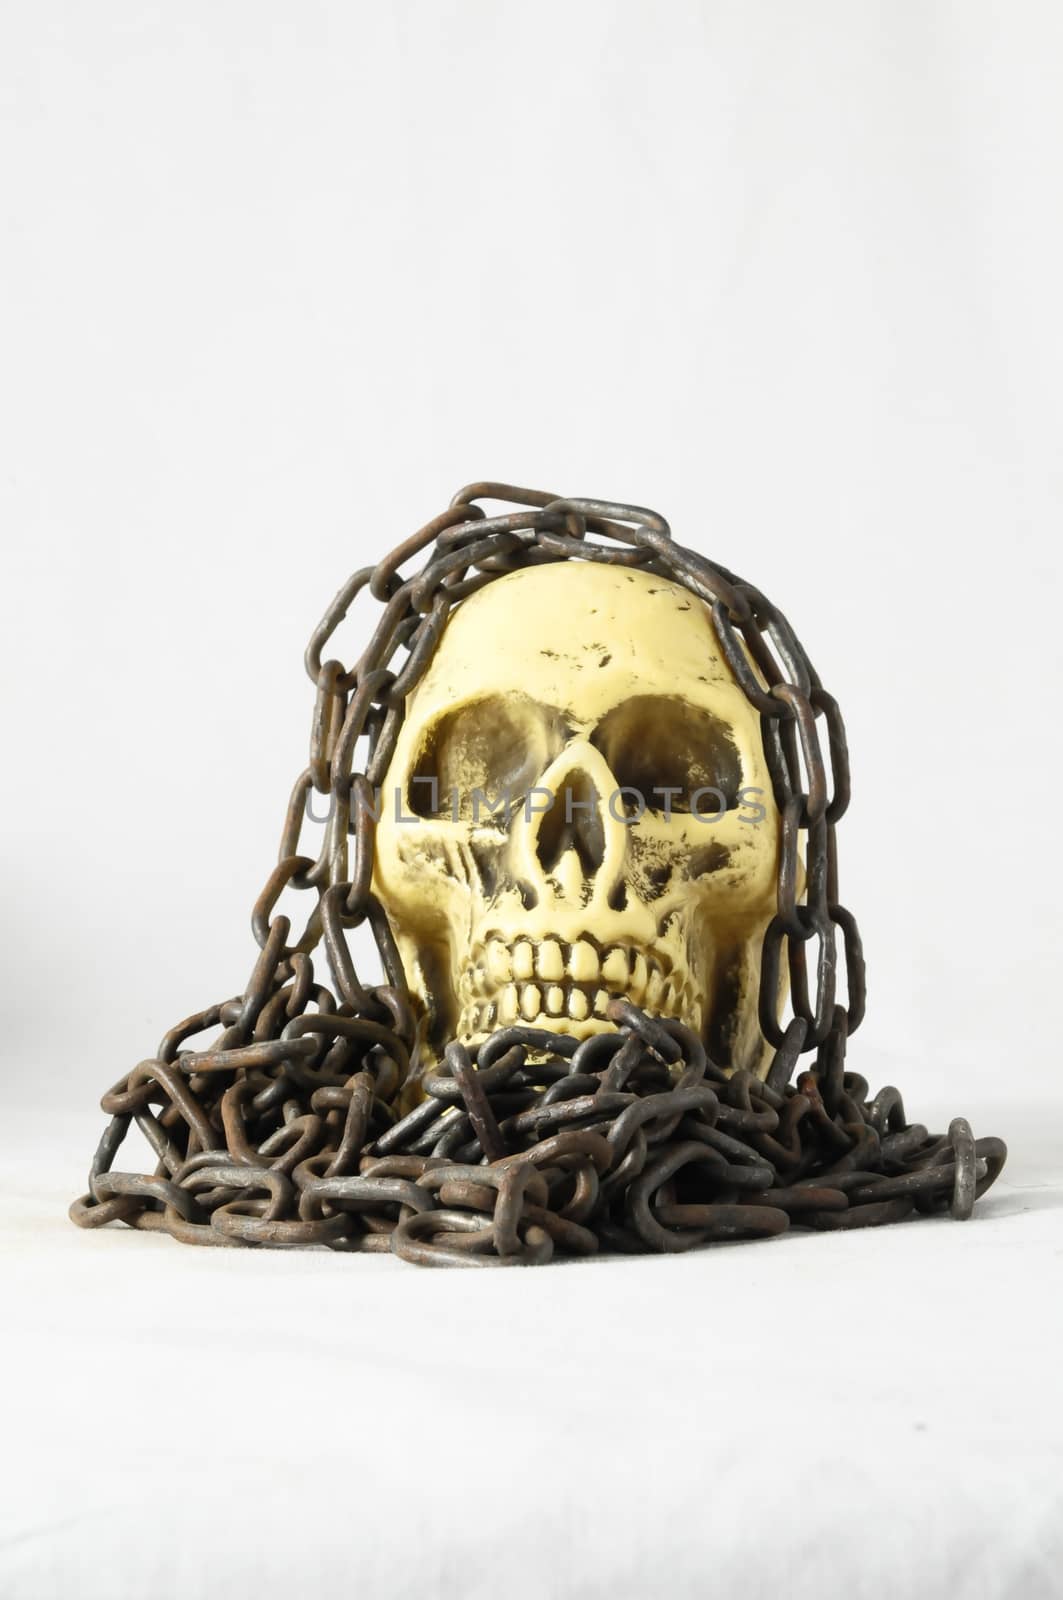 Skull and old Chains on a White Background